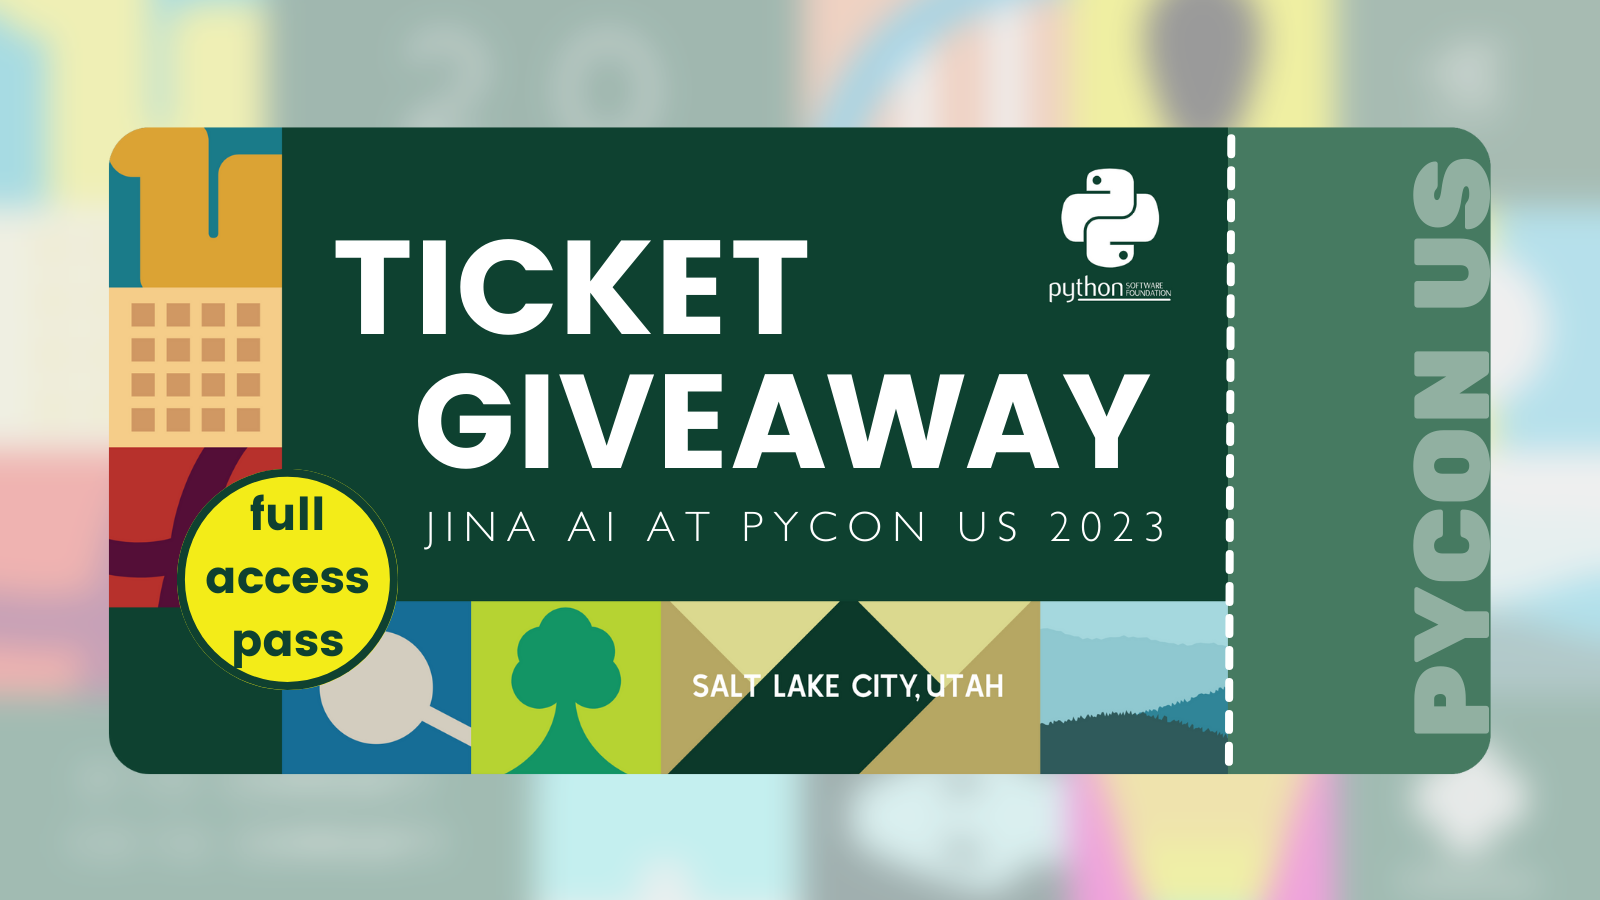 Green promotional ticket for Jina AI's giveaway to PyCon US 2023 in Salt Lake City, highlighting full access pass